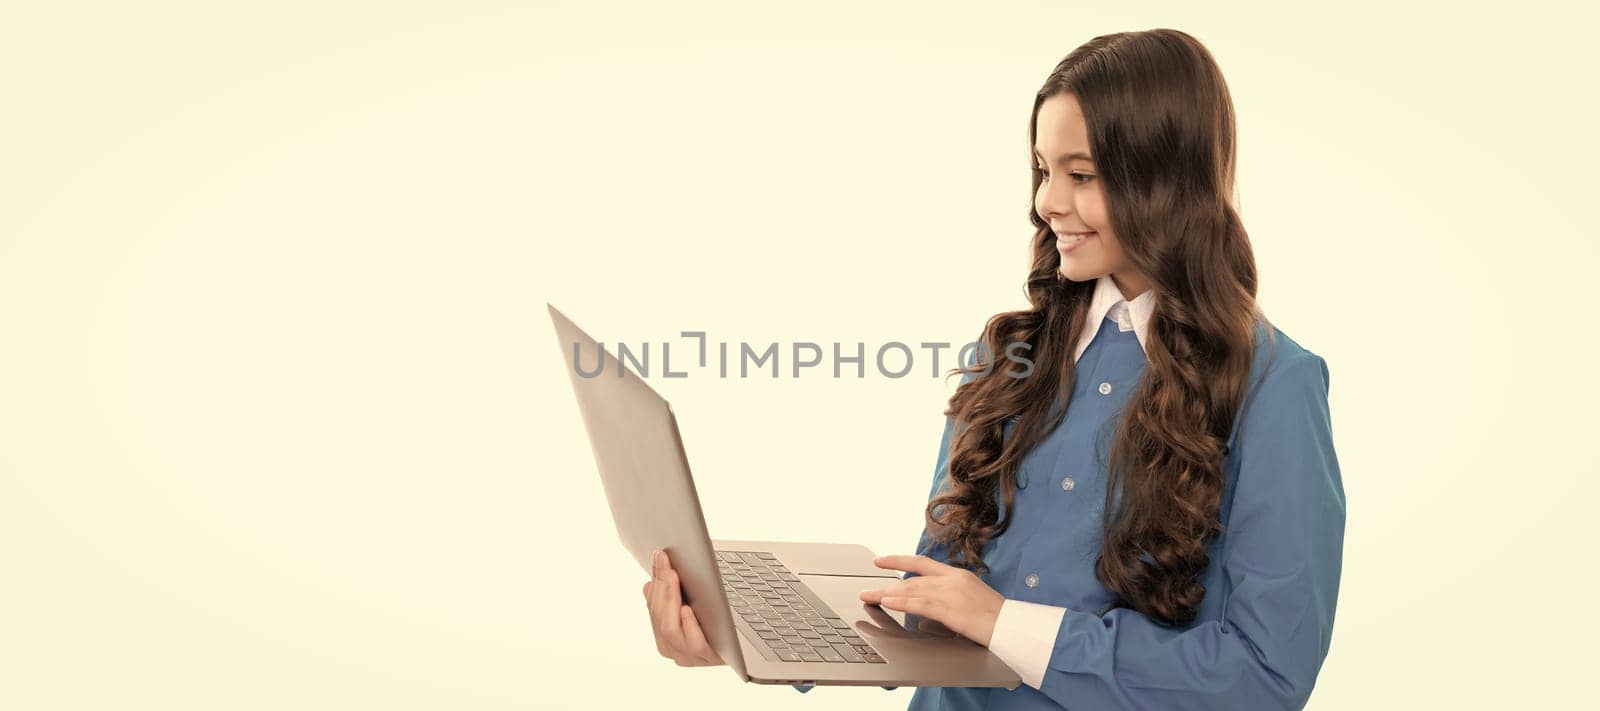 typing school blog on computer. kid on video lesson. teen girl use laptop for blogging. School girl portrait with laptop, horizontal poster. Banner header with copy space. by RedFoxStudio